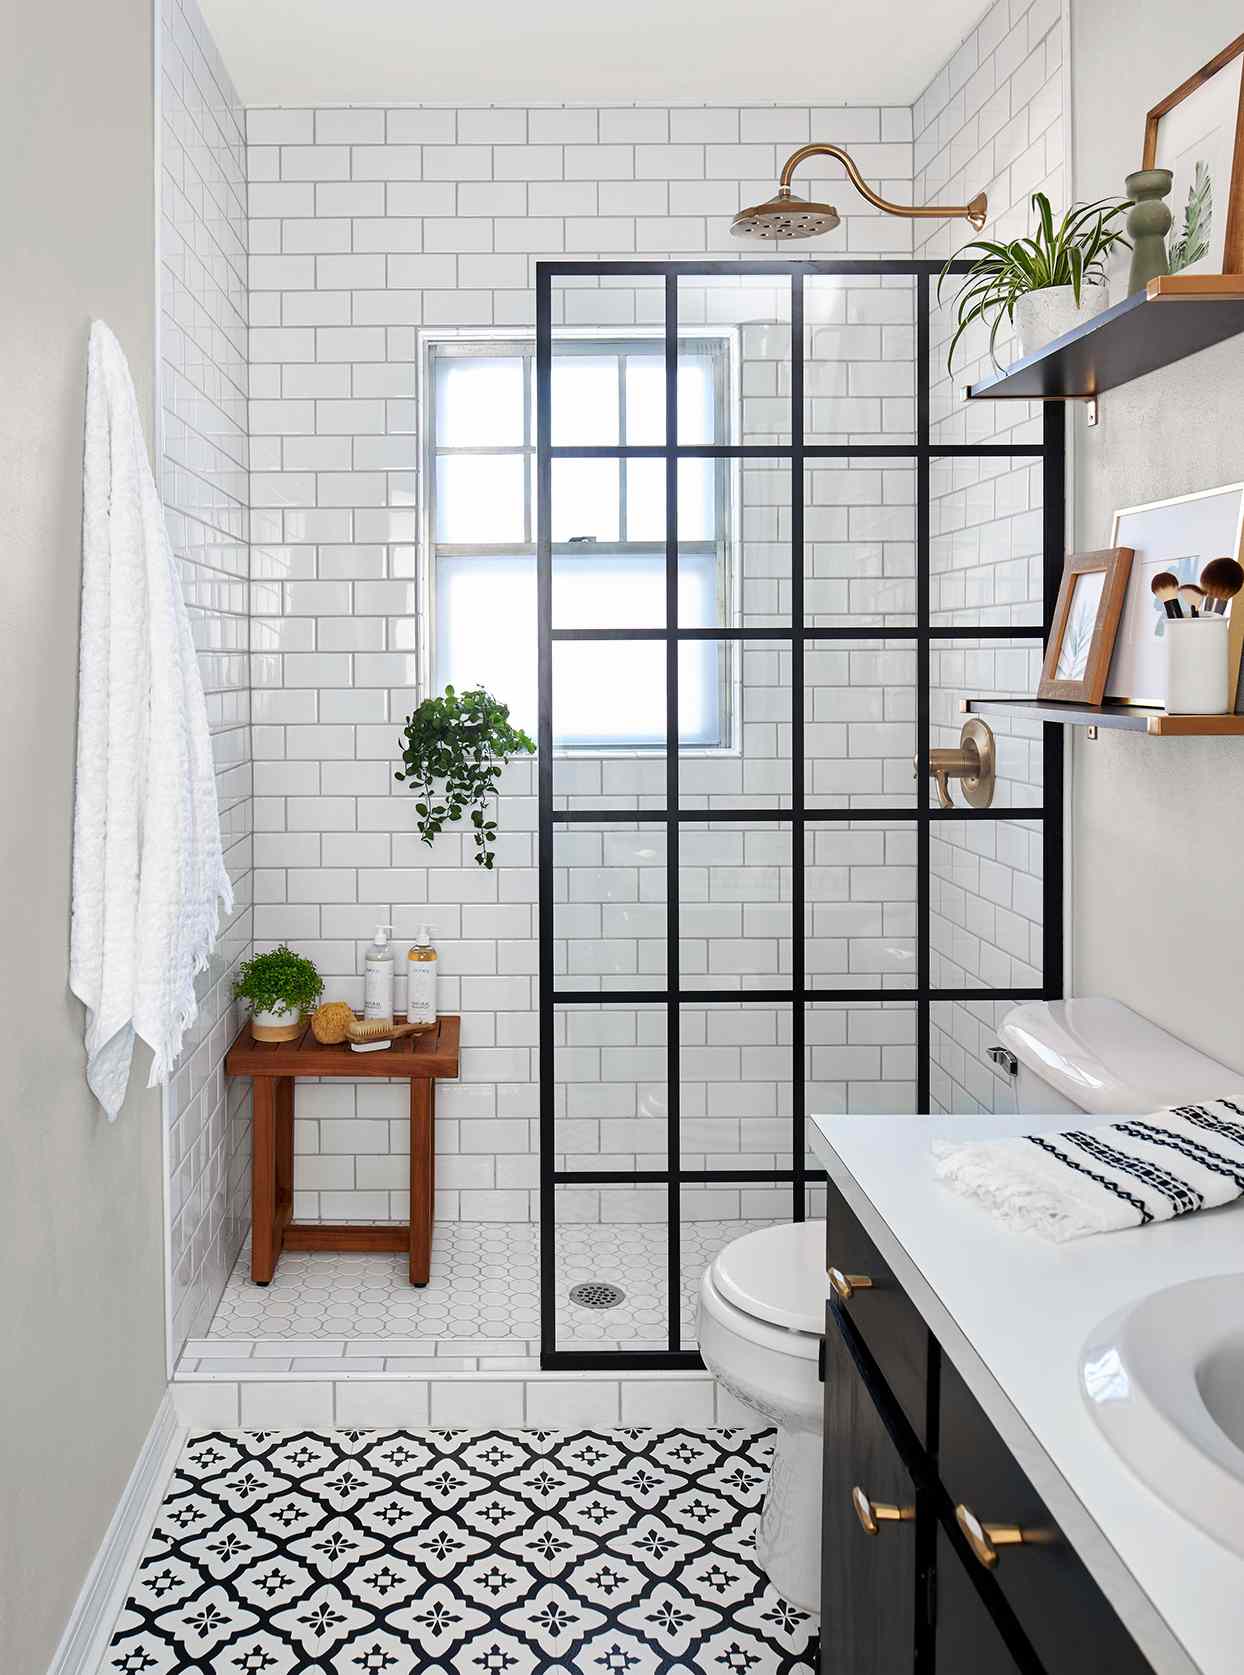 Before And After Small Bathroom Remodels That Showcase Stylish Budget Friendly Ideas Better Homes Gardens